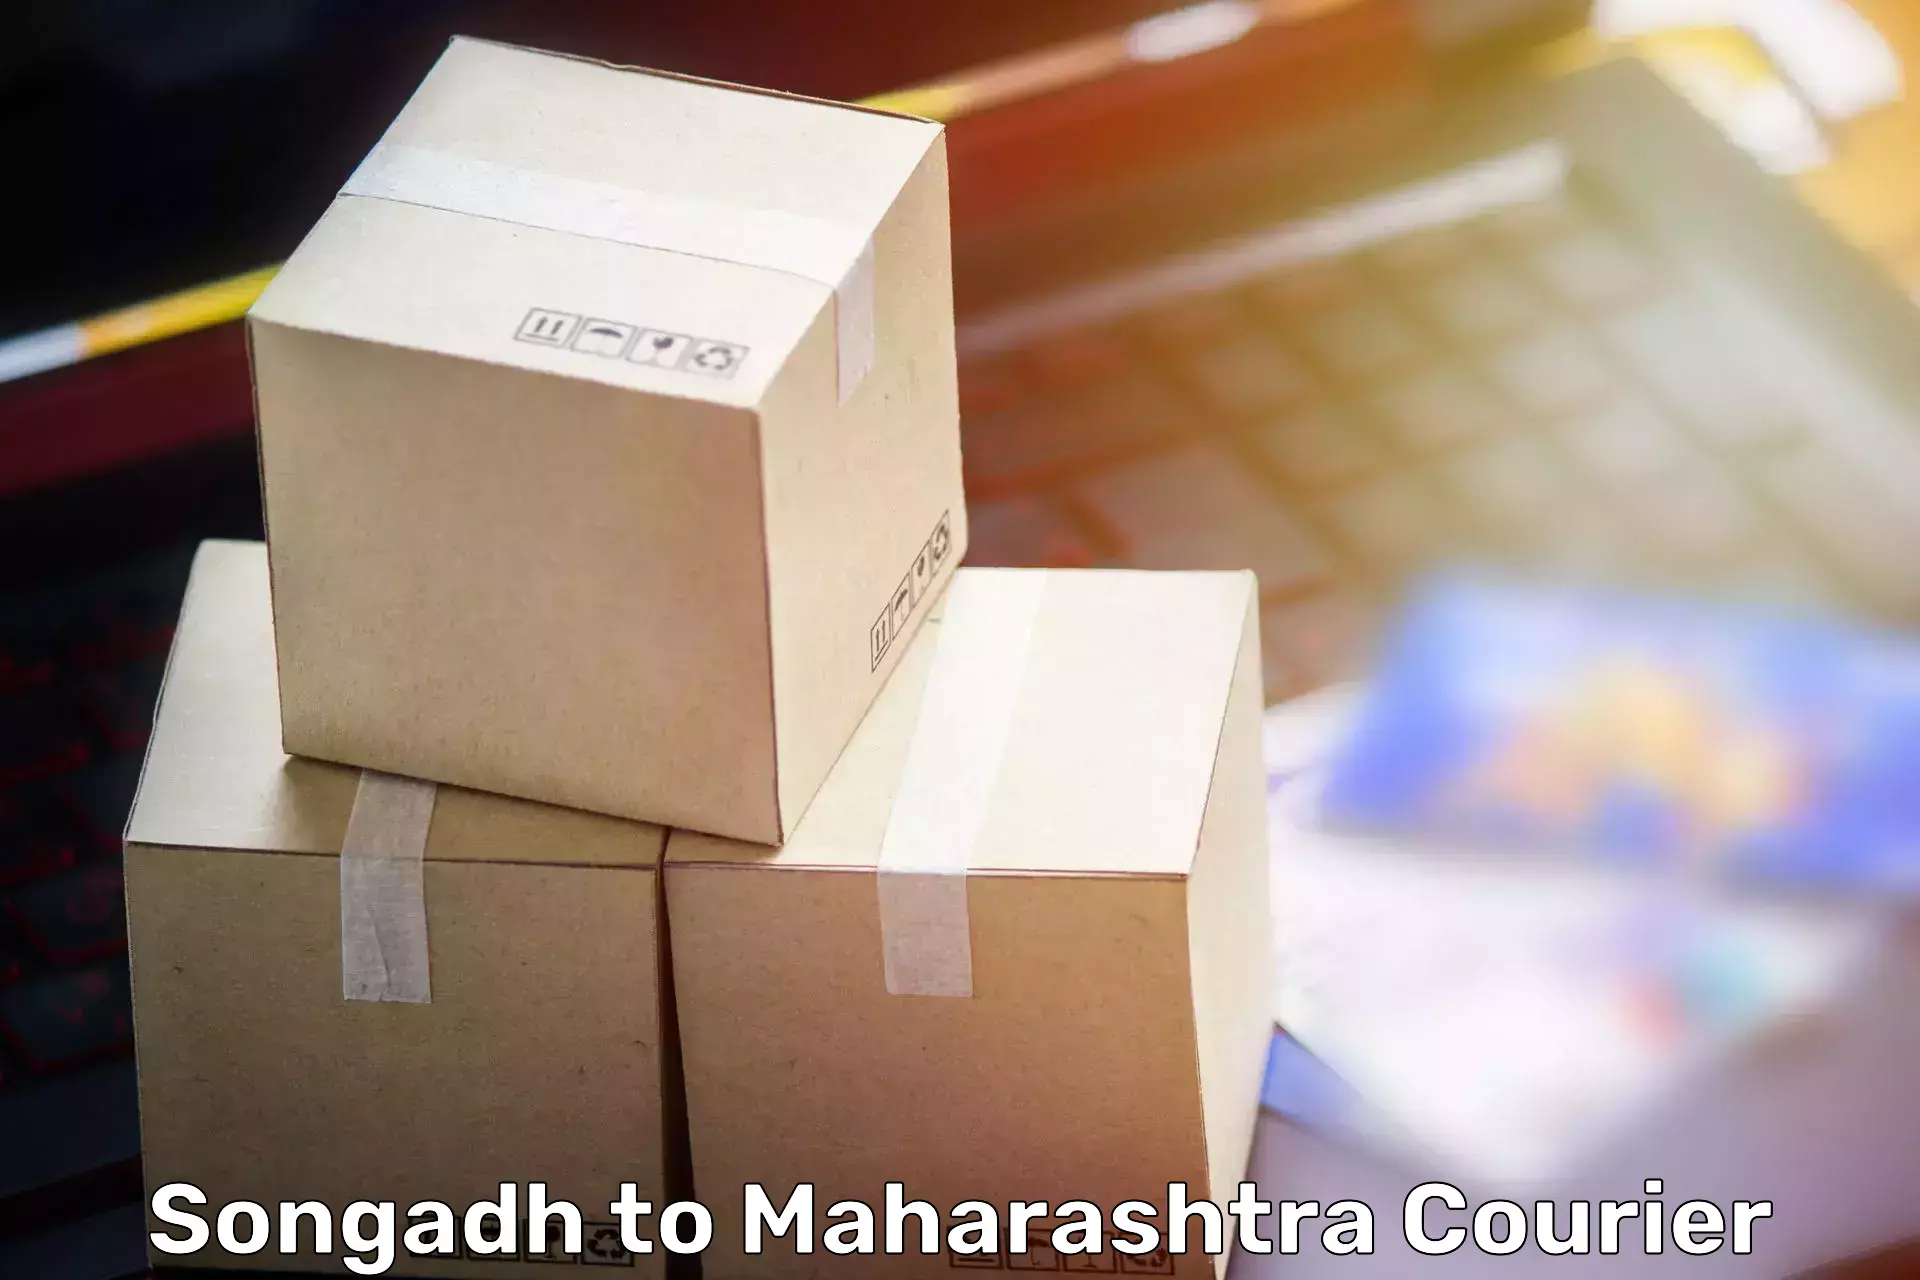 Home goods moving company Songadh to Worli